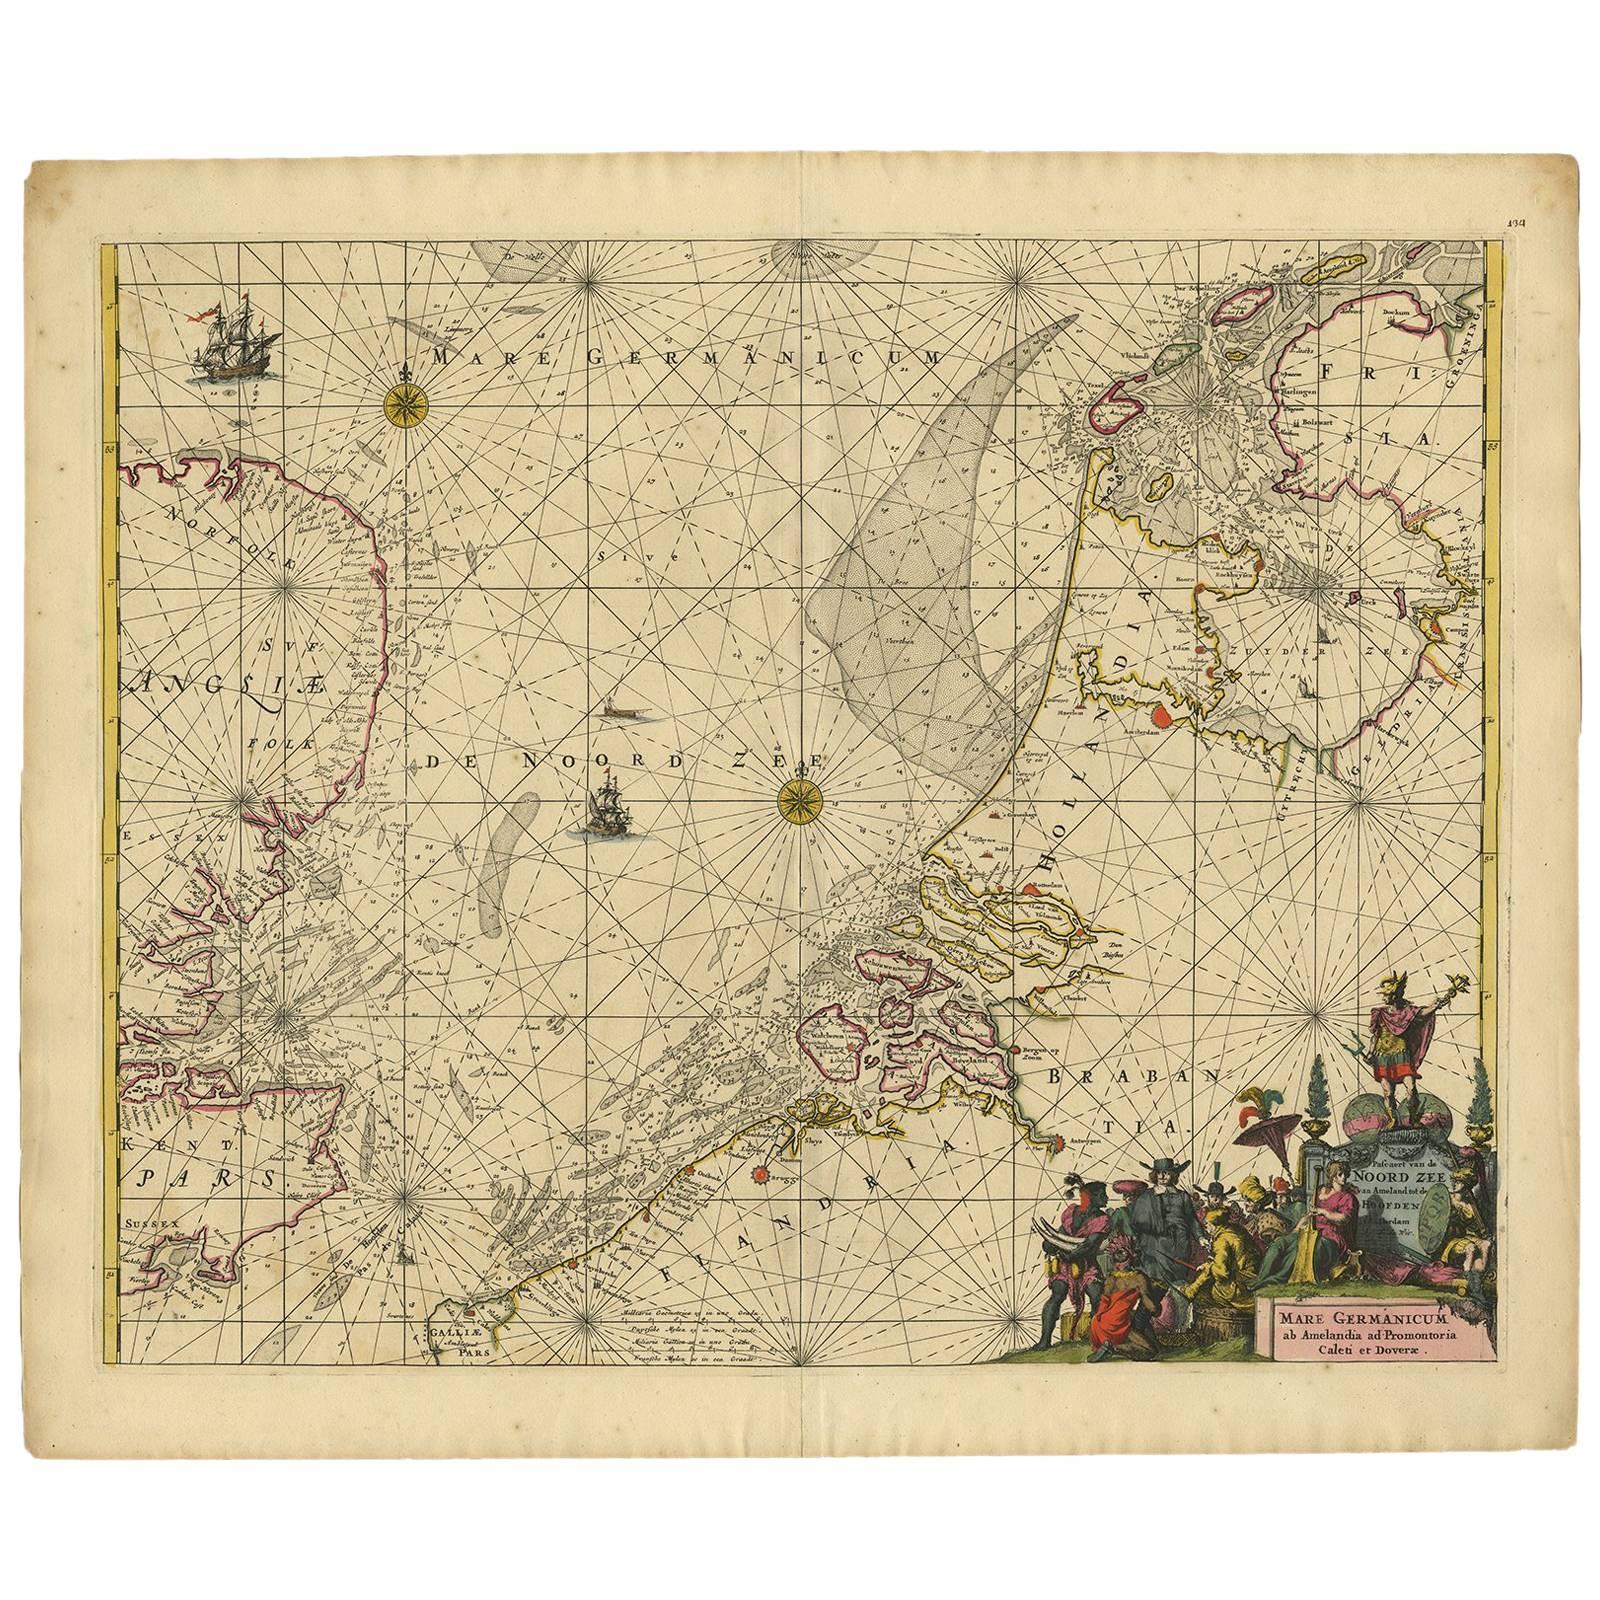 Antique Sea Chart of the North Sea by F. de Wit, 1675